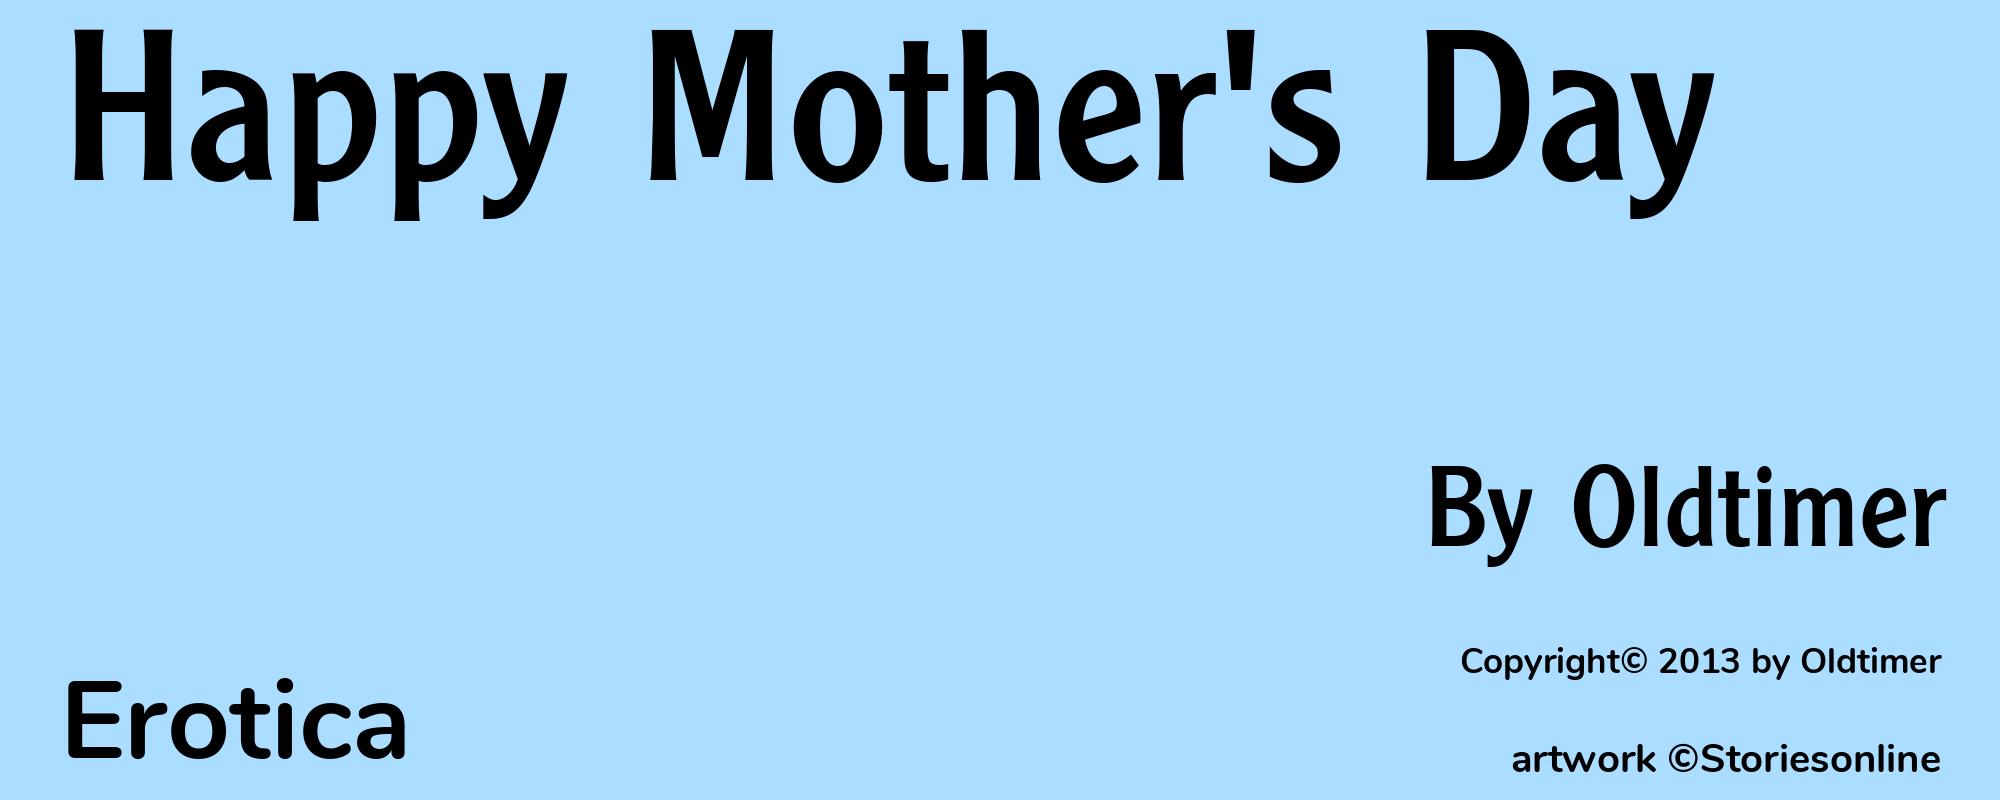 Happy Mother's Day - Cover